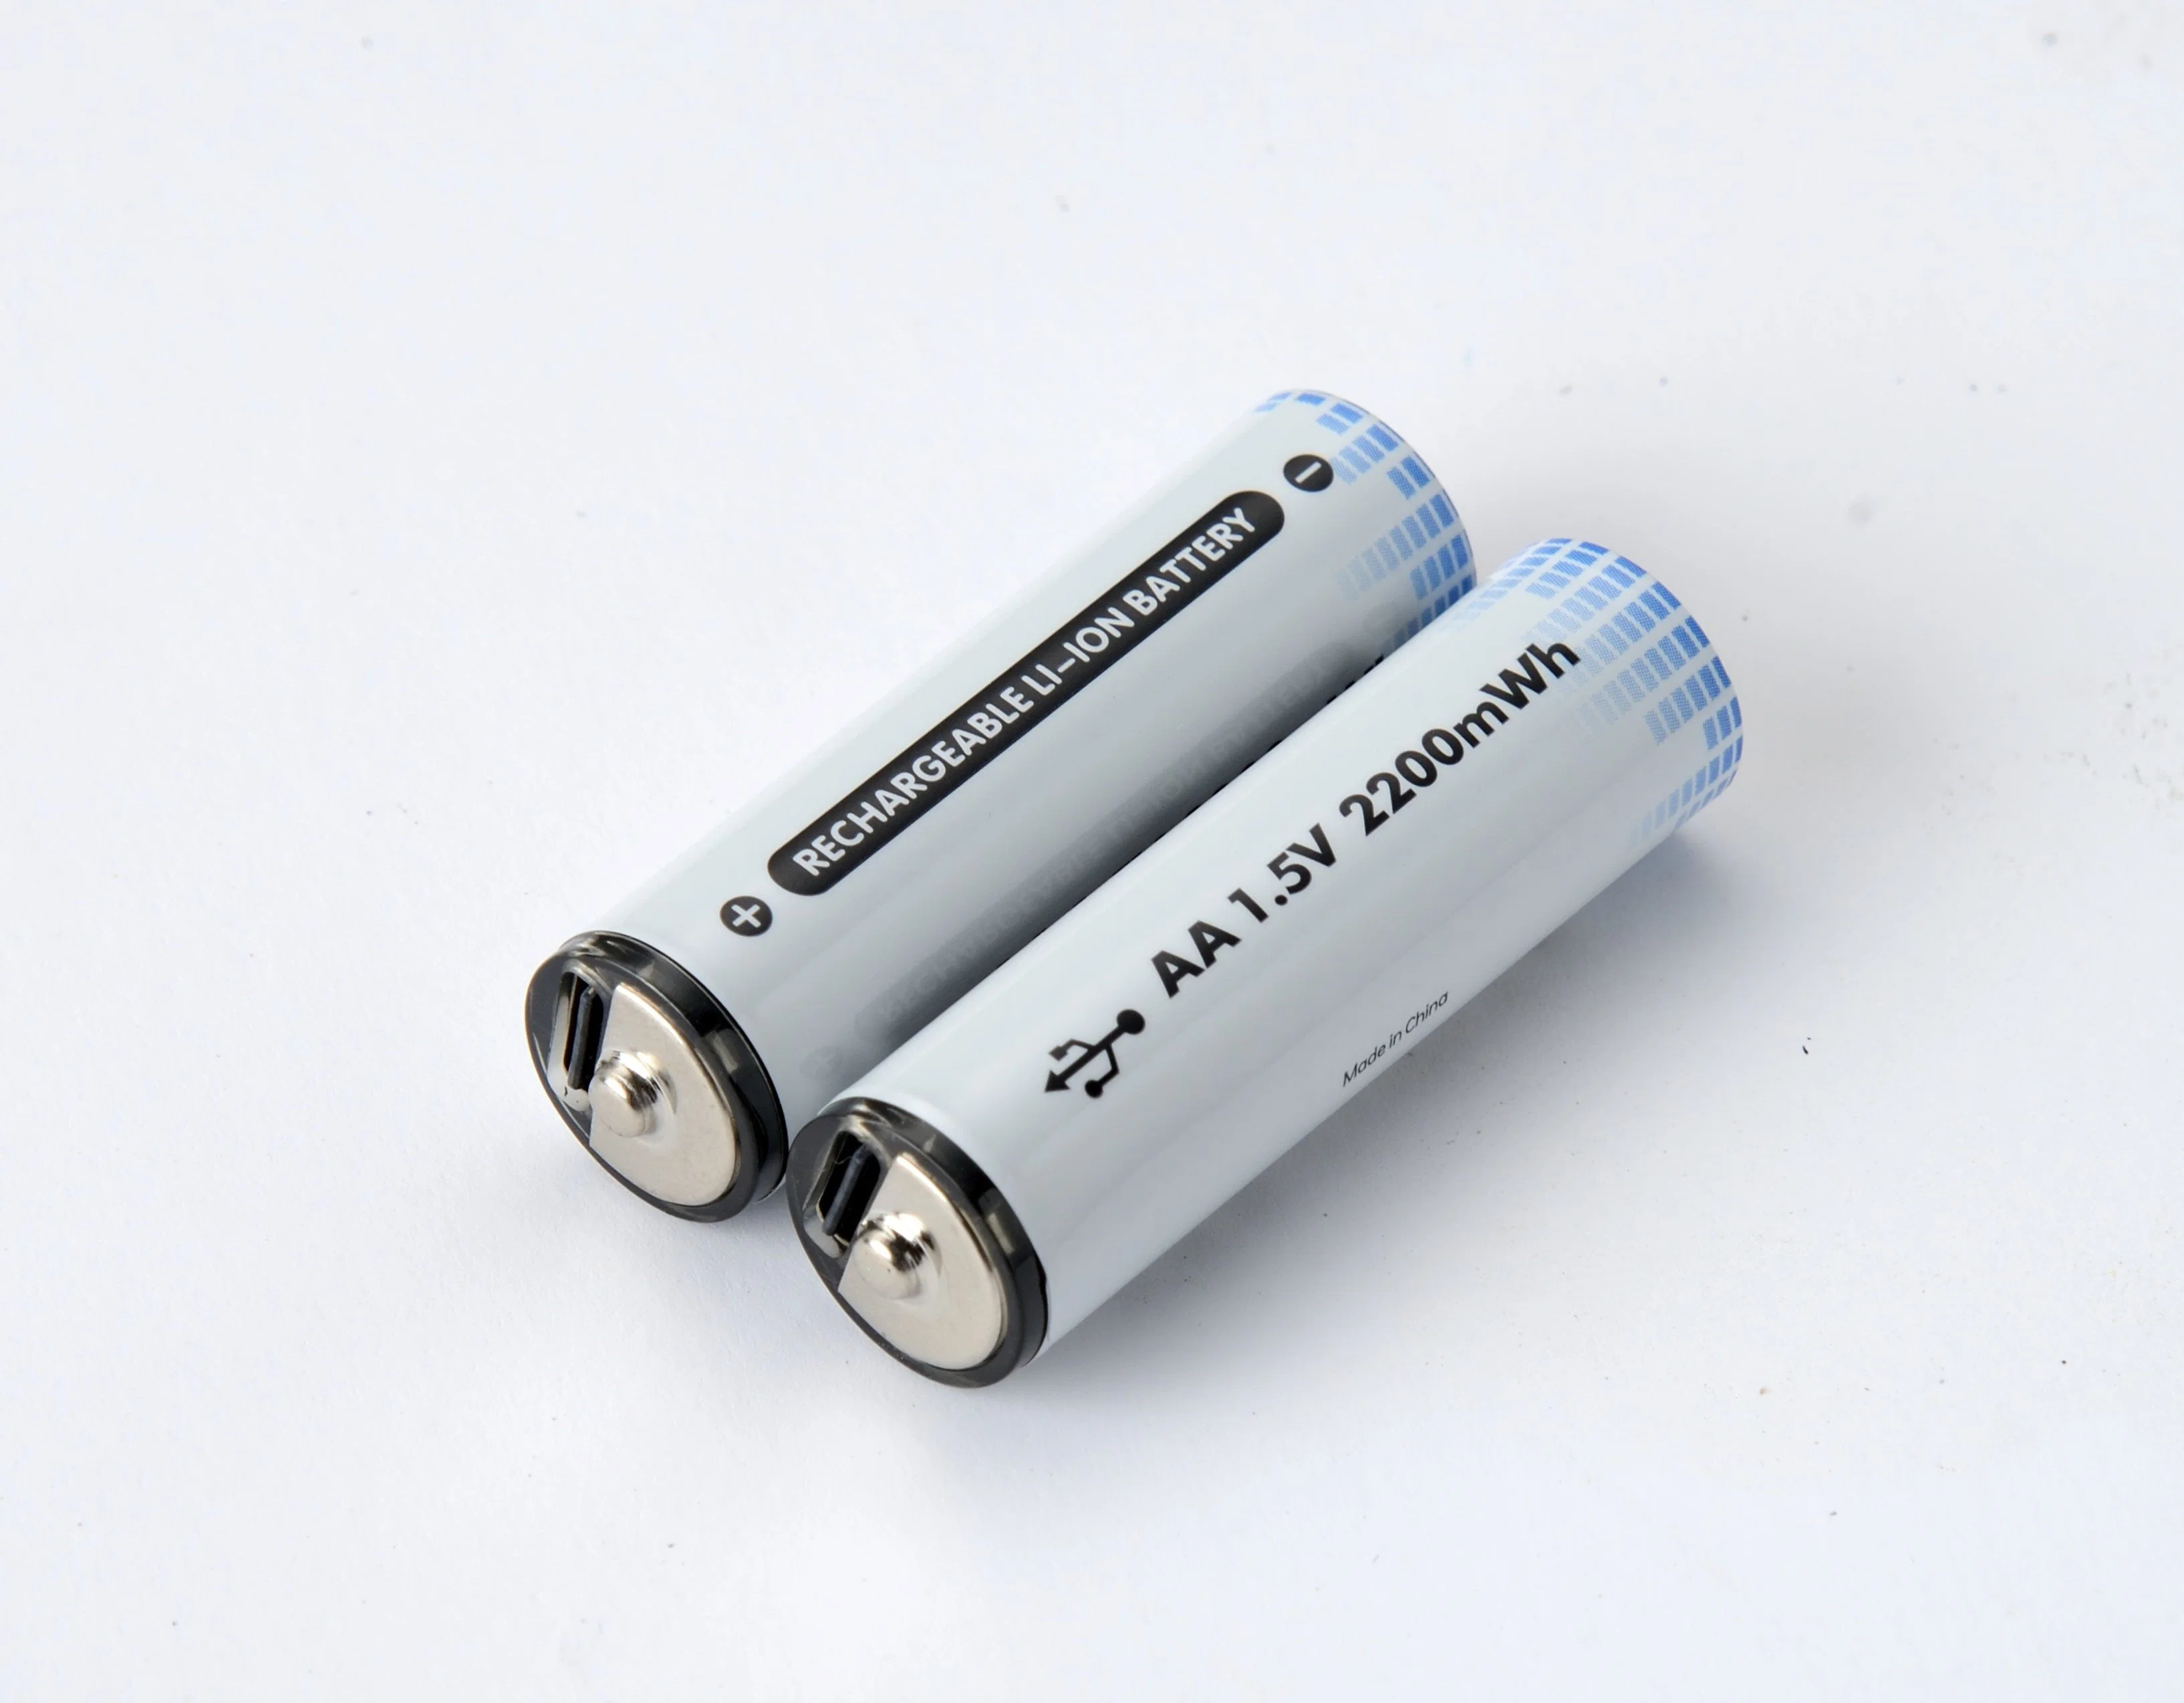 USB Rechargeable Battery, AA Rechargeable Battery Type-C, No. 5 2200mwh